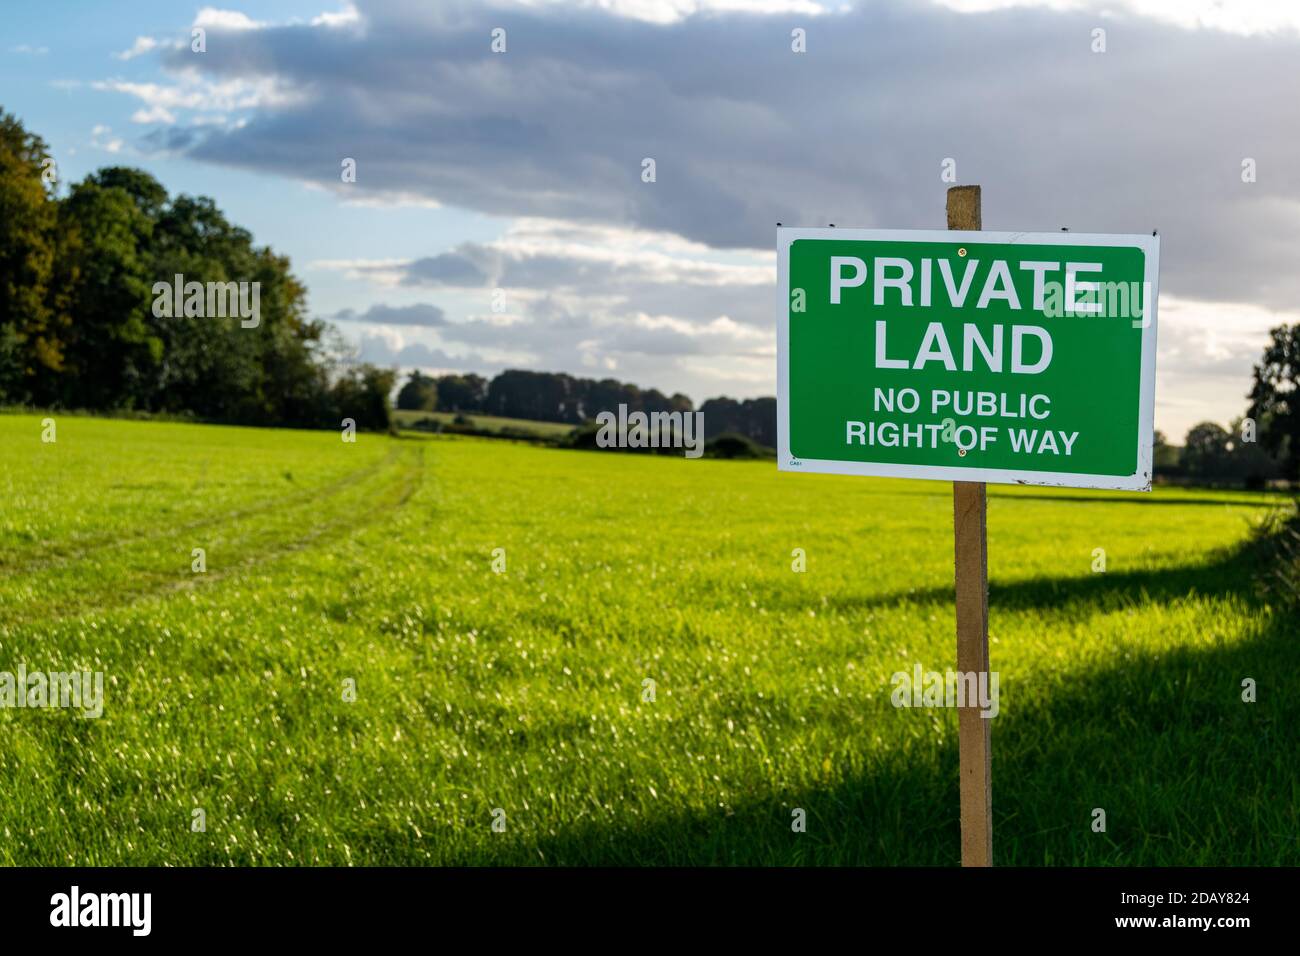 Private land no public right of way saying sign, beautiful and inviting lush open grassland behind, farmers taking lands and prohibit the entry Stock Photo